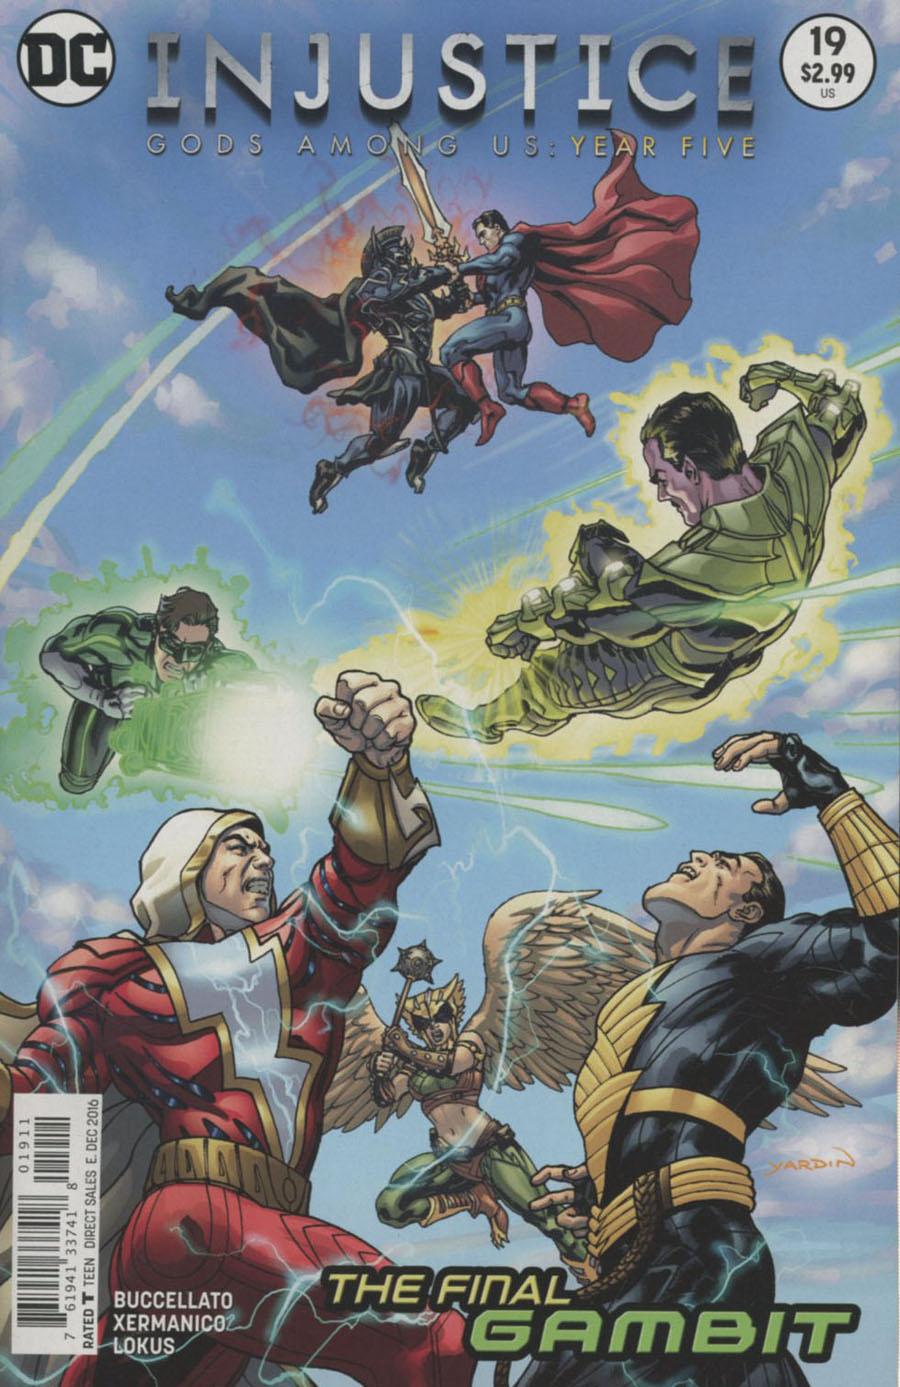 Injustice Gods Among Us Year Five Vol. 1 #19